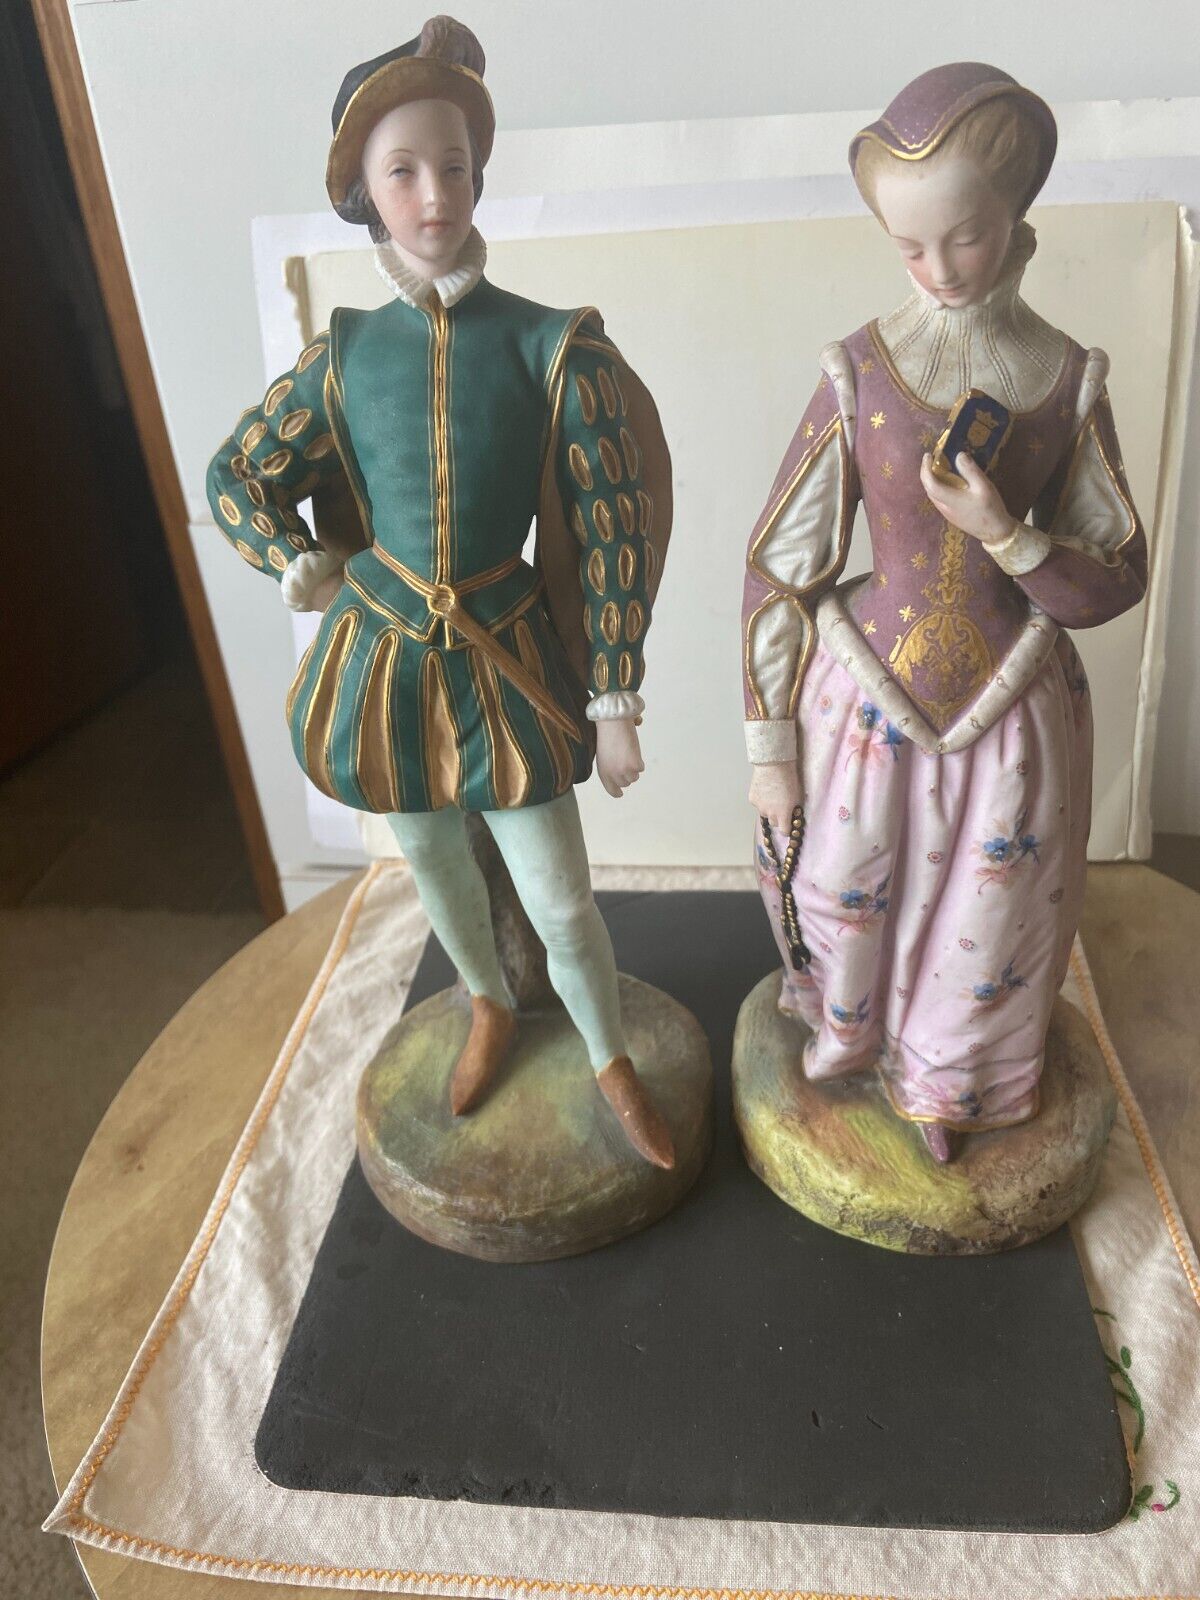 ANTIQUE FRENCH PAIR OF BISQUE FIGURINES BY JEAN GILLE  IN 16TH CENTURY CLOTHING.